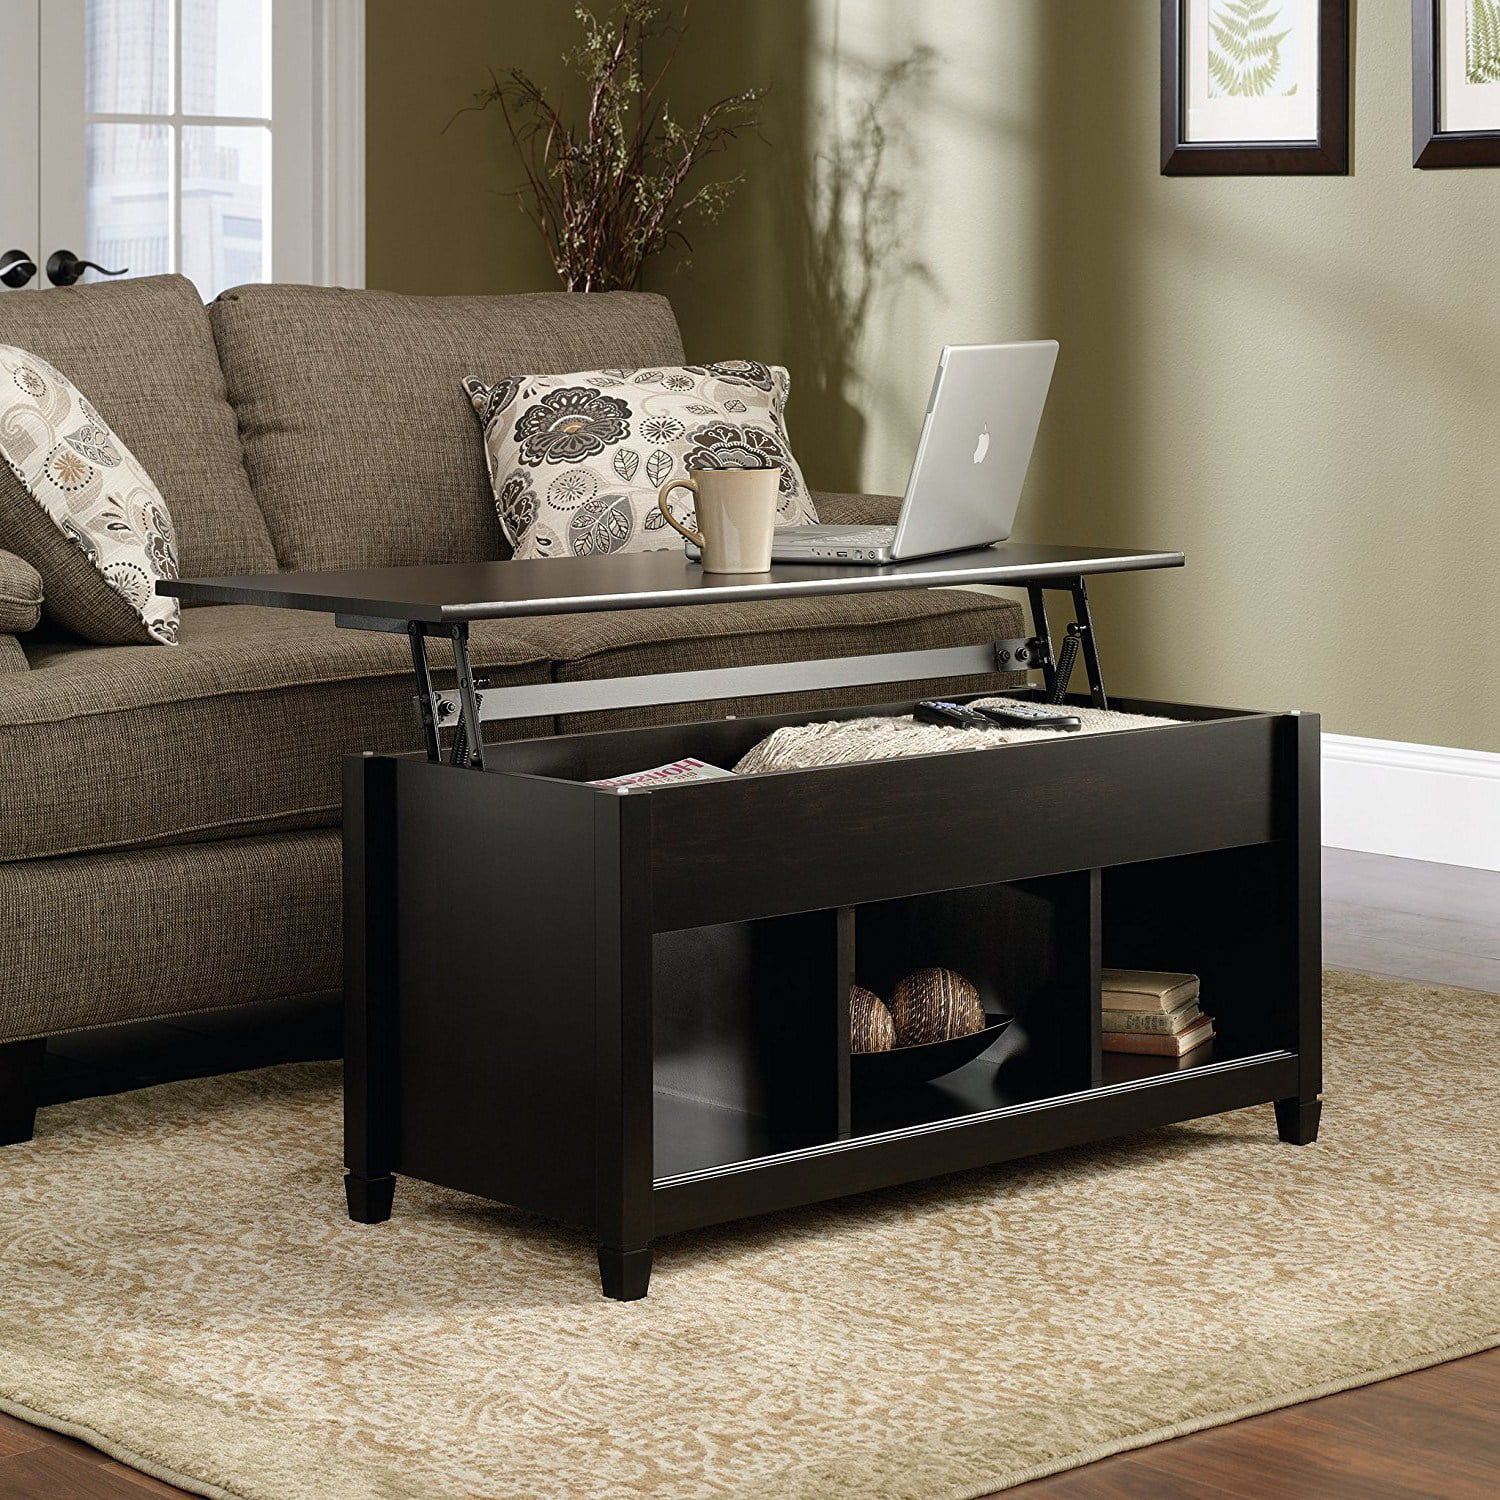 Zimtown Lift Up Top Coffee Table With Hidden Compartment End Rectangle Throughout Coffee Tables With Hidden Compartments (View 15 of 20)